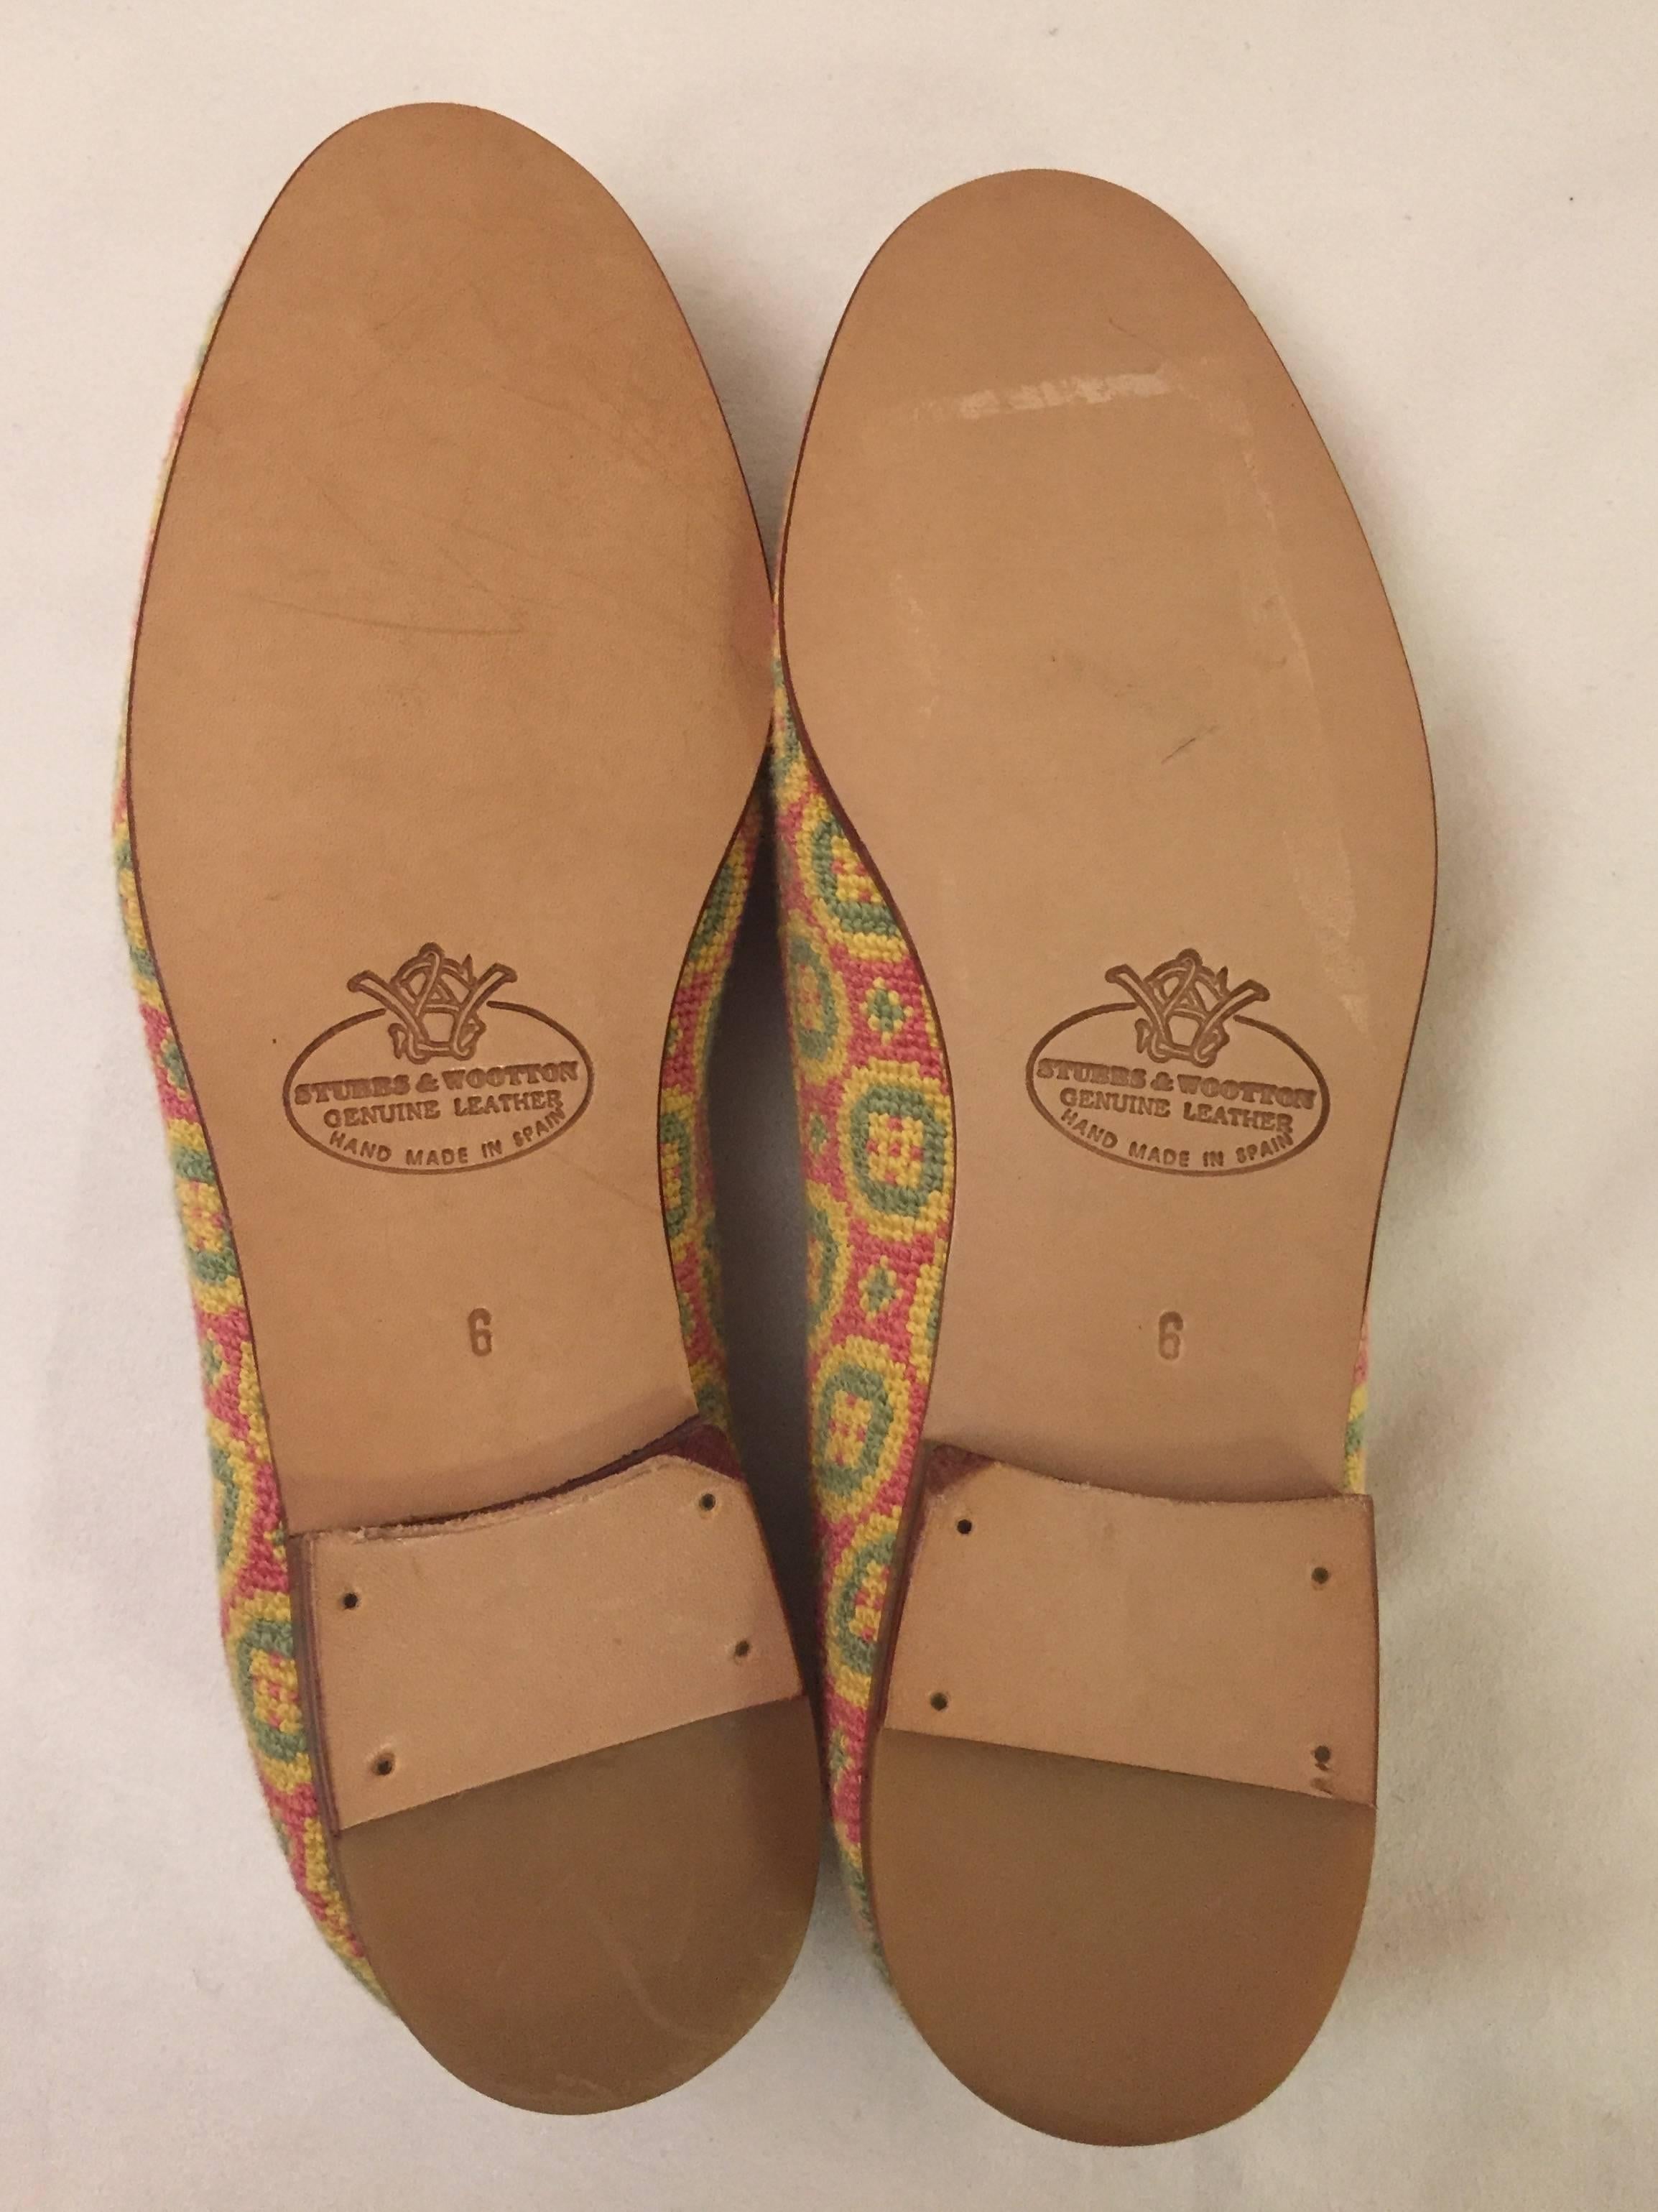 Stubbs & Wootton Sensible Needlepoint Fabric Slippers in Yellow Pink and Green  2